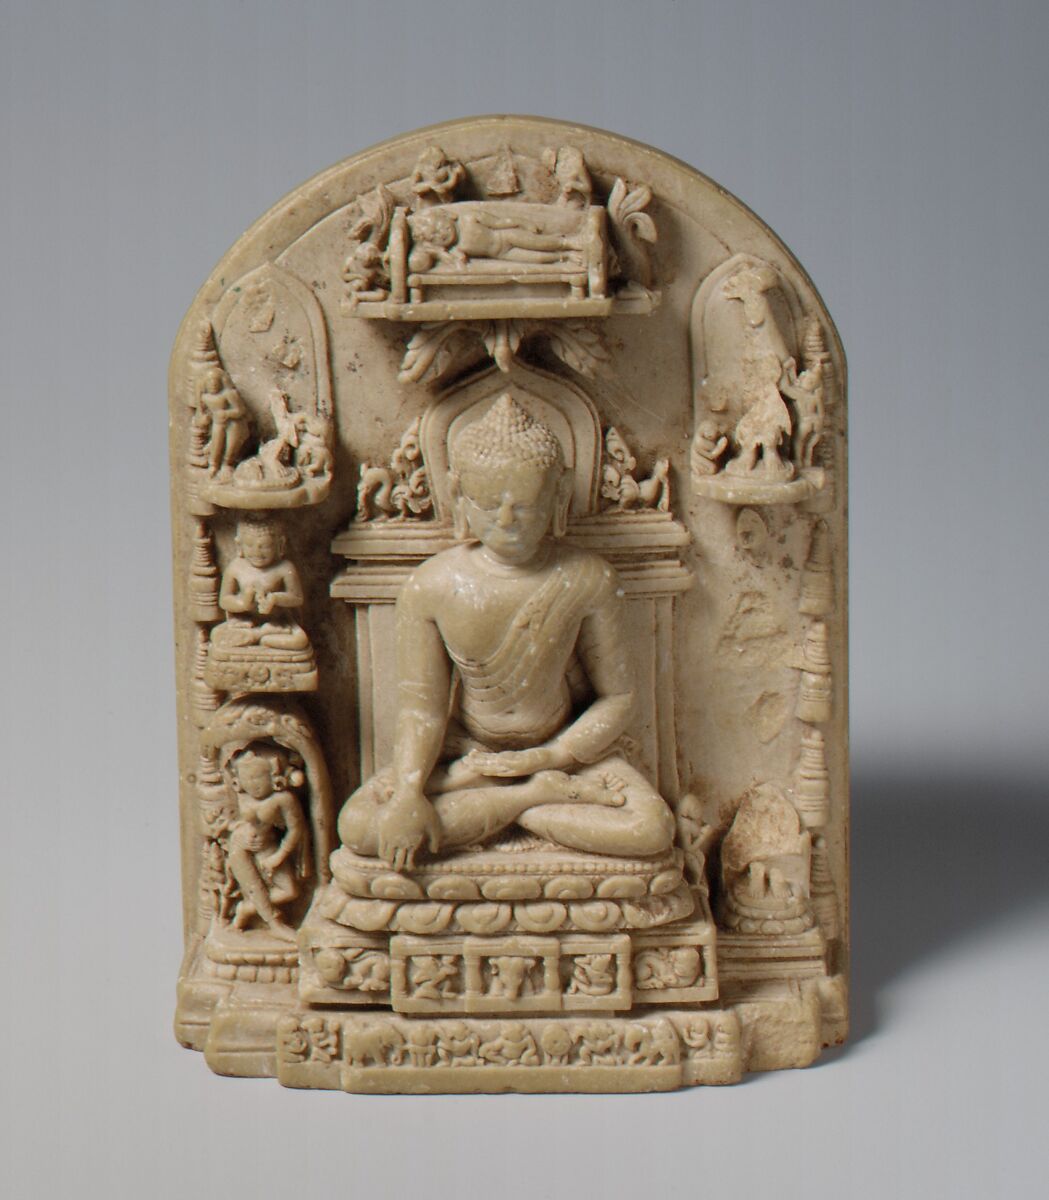 Plaque with Scenes from the Life of the Buddha